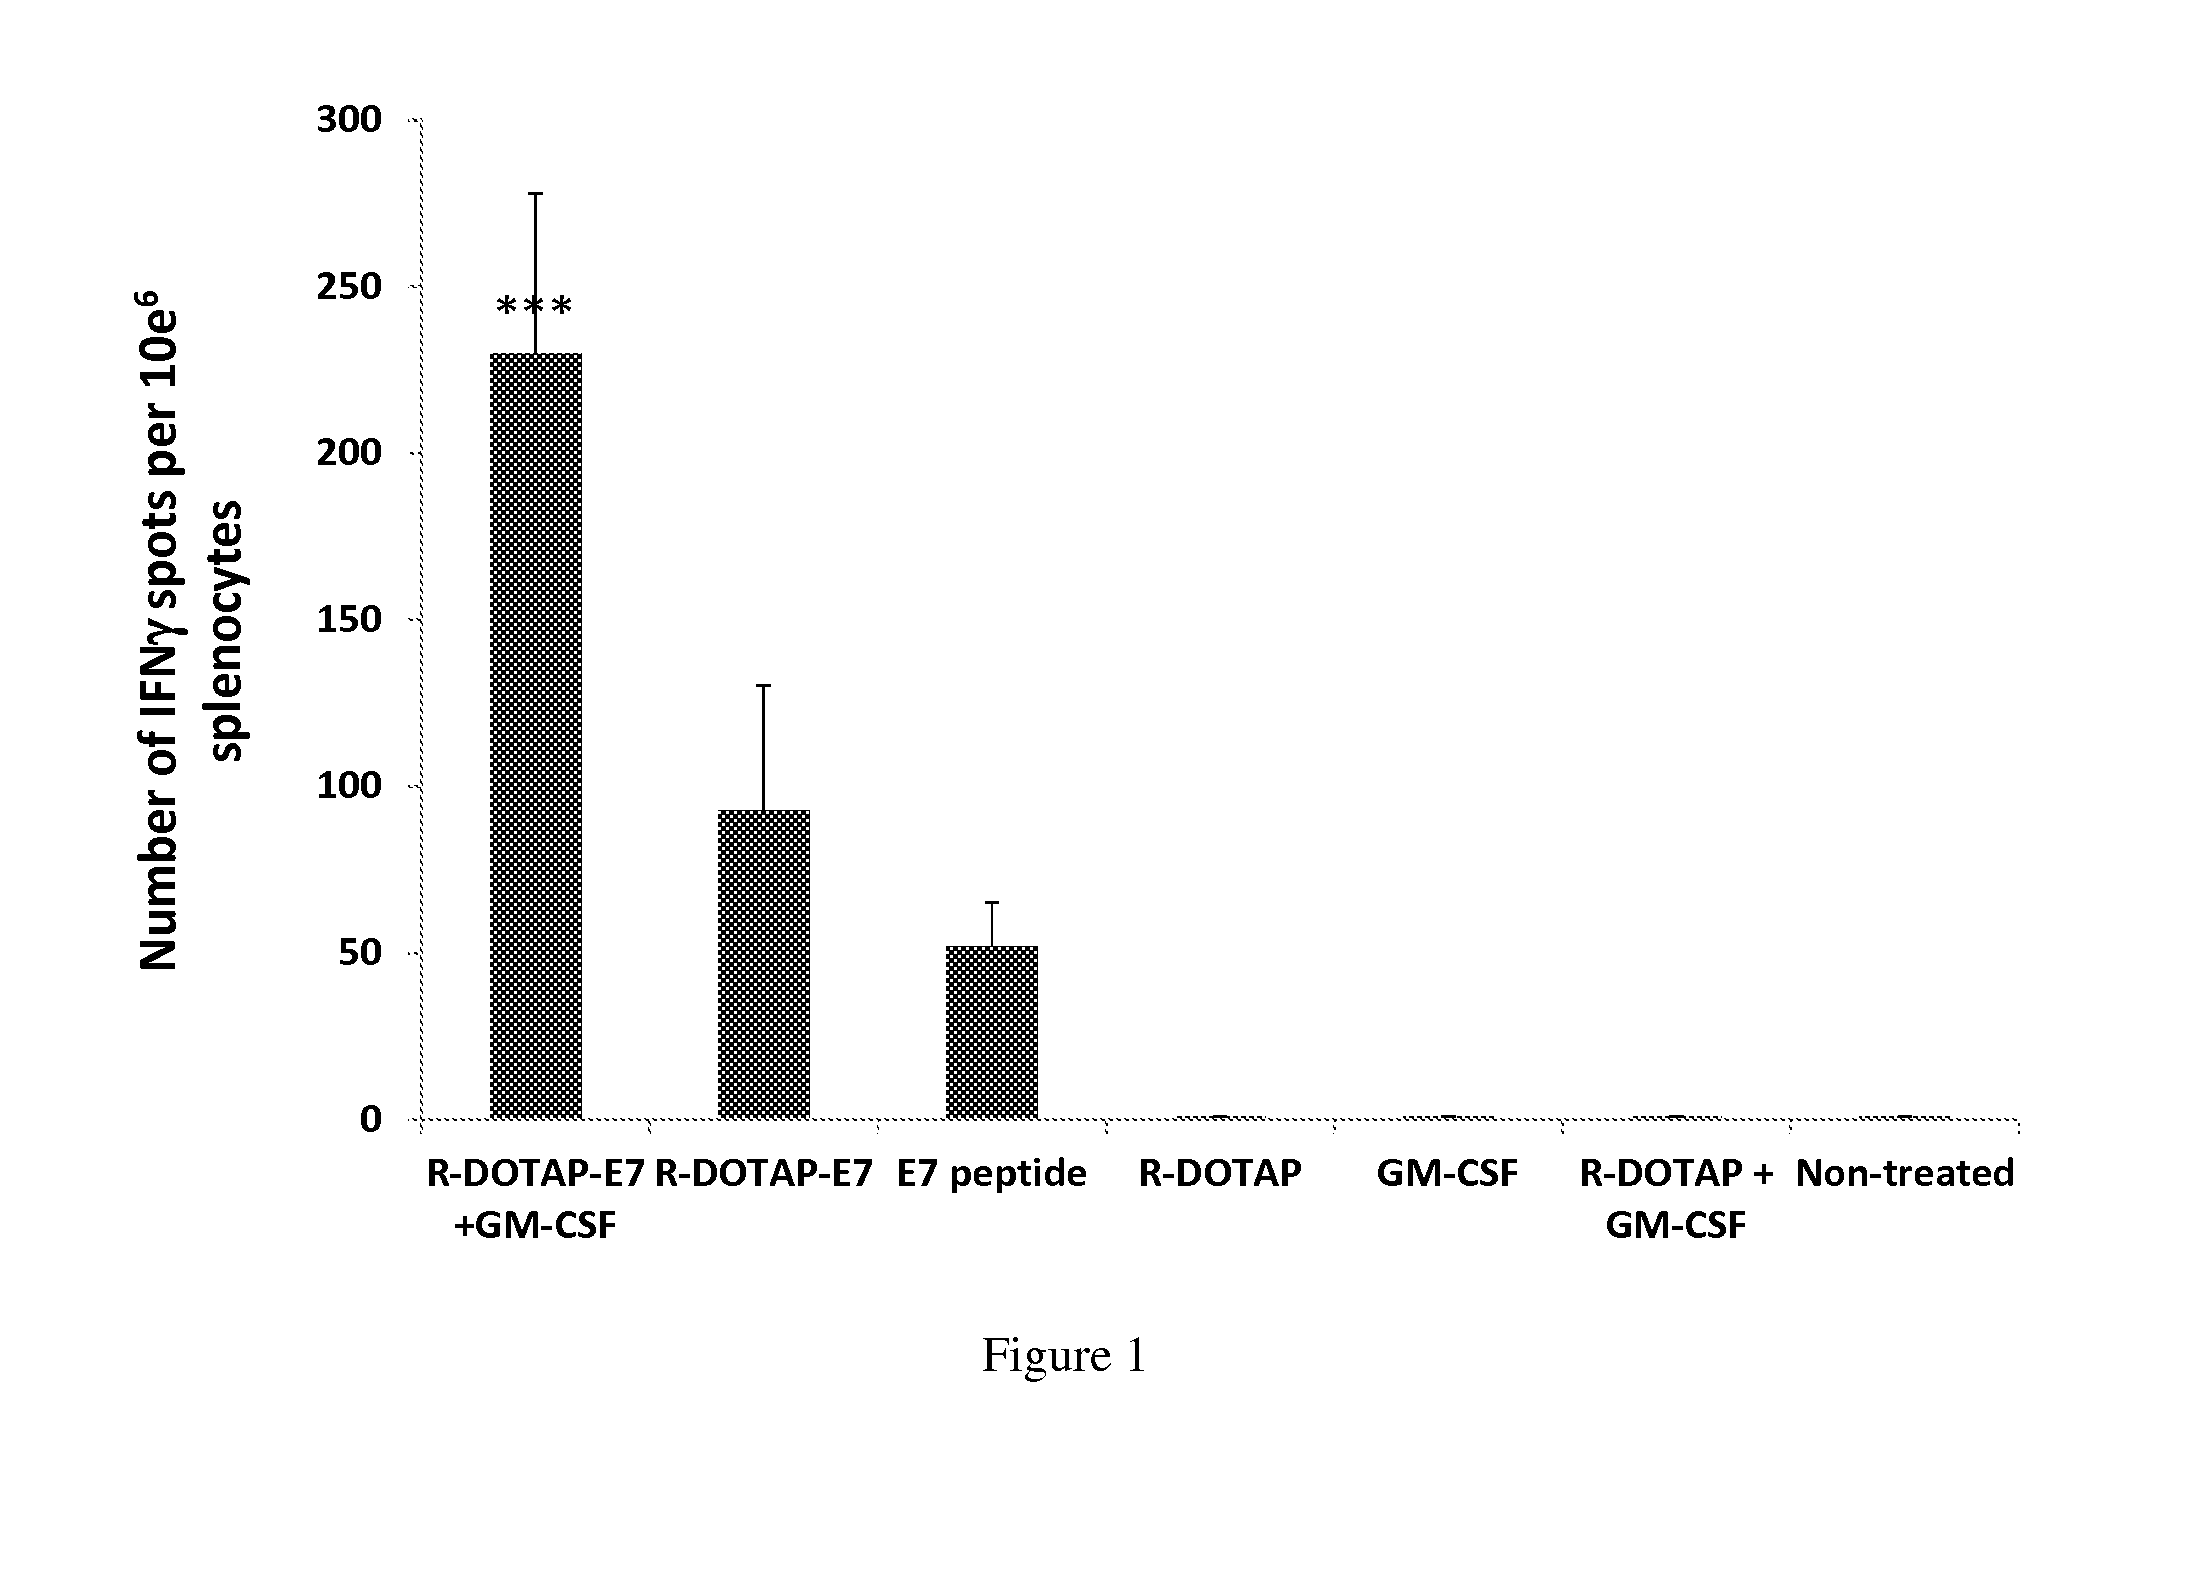 Cationic lipid vaccine compositions and methods of use